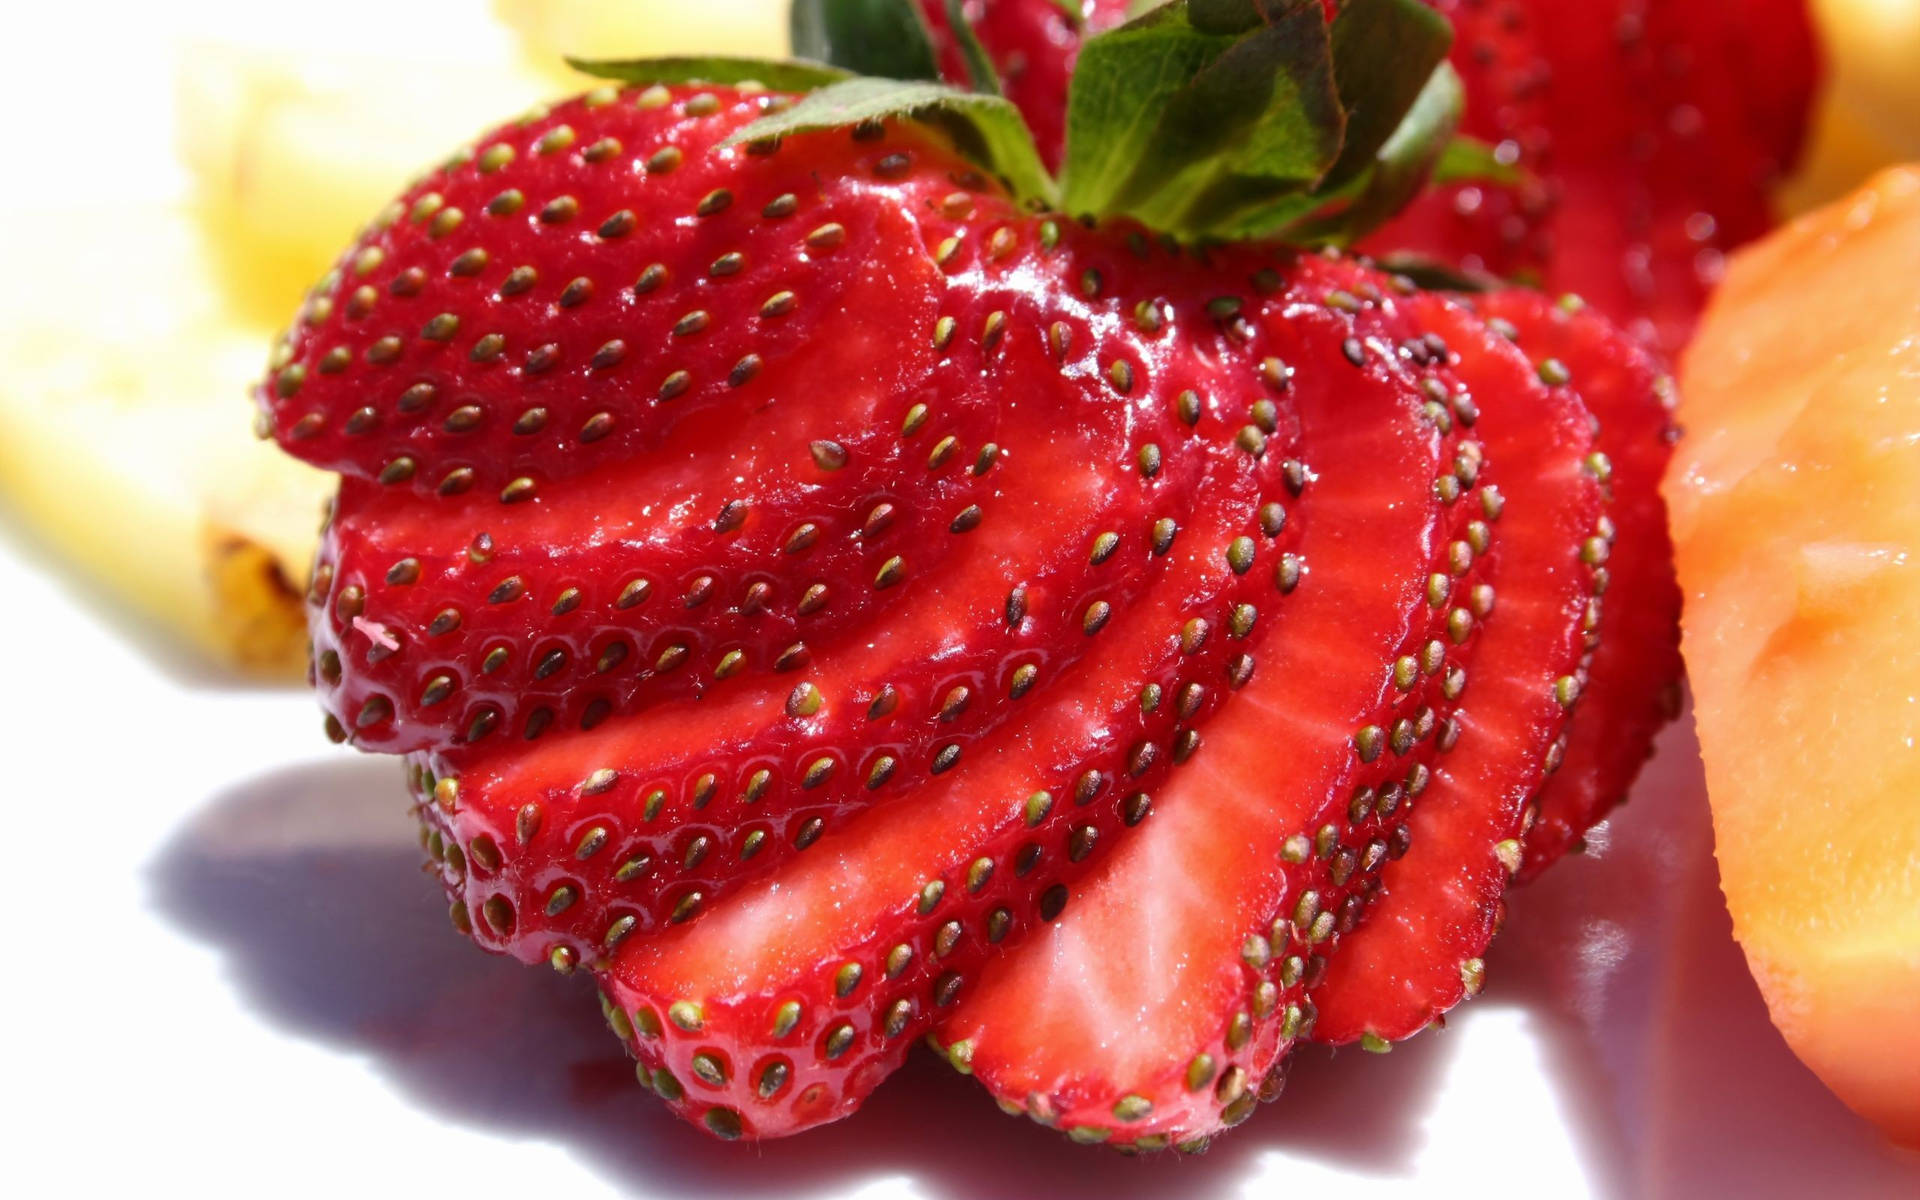 Strawberry 2560X1600 Wallpaper and Background Image